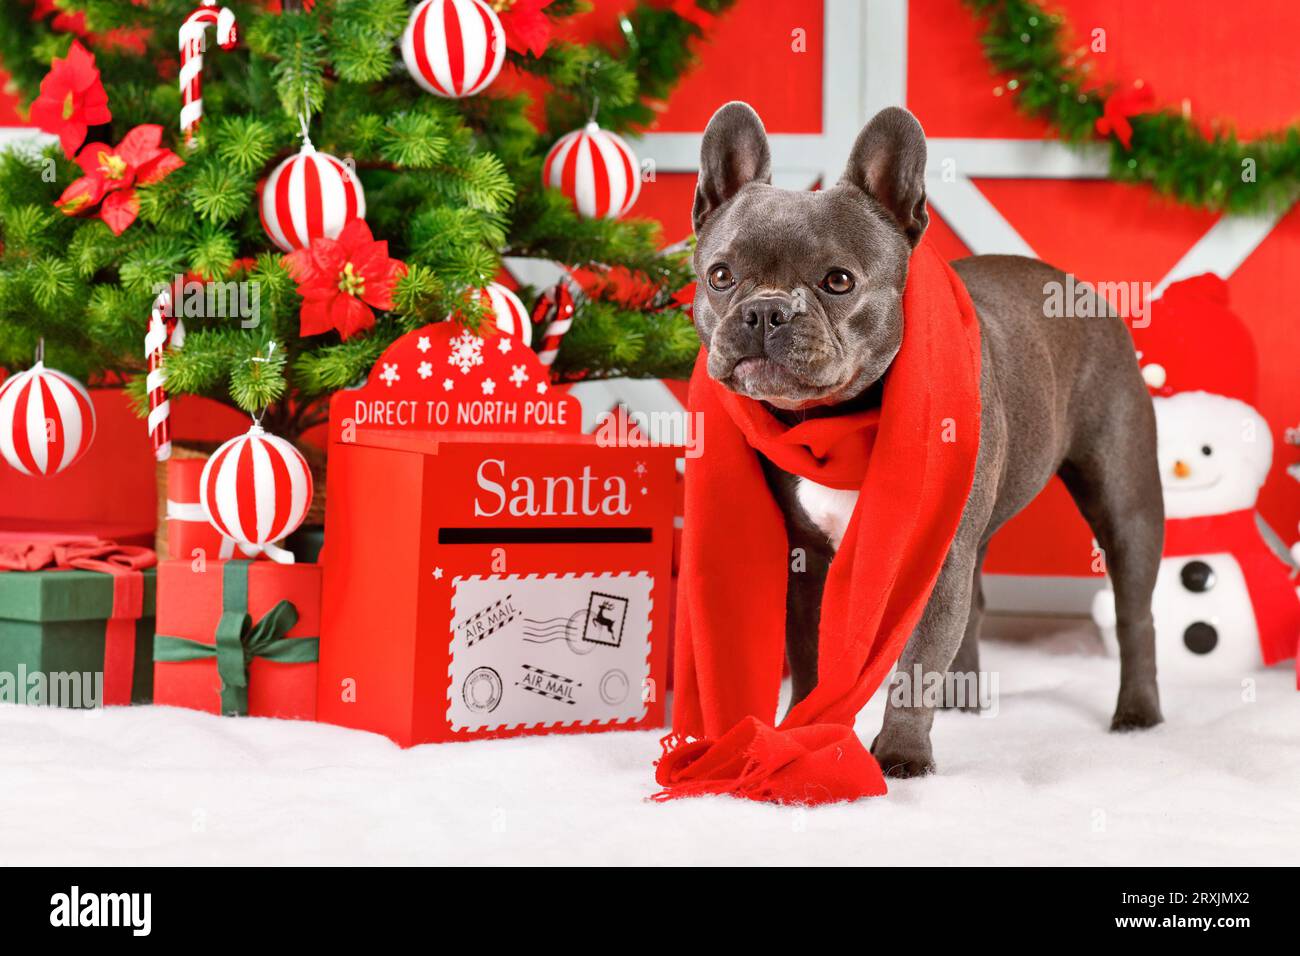 French Bulldog dog wearing red winter scarf next to festive Christmas decoration Stock Photo